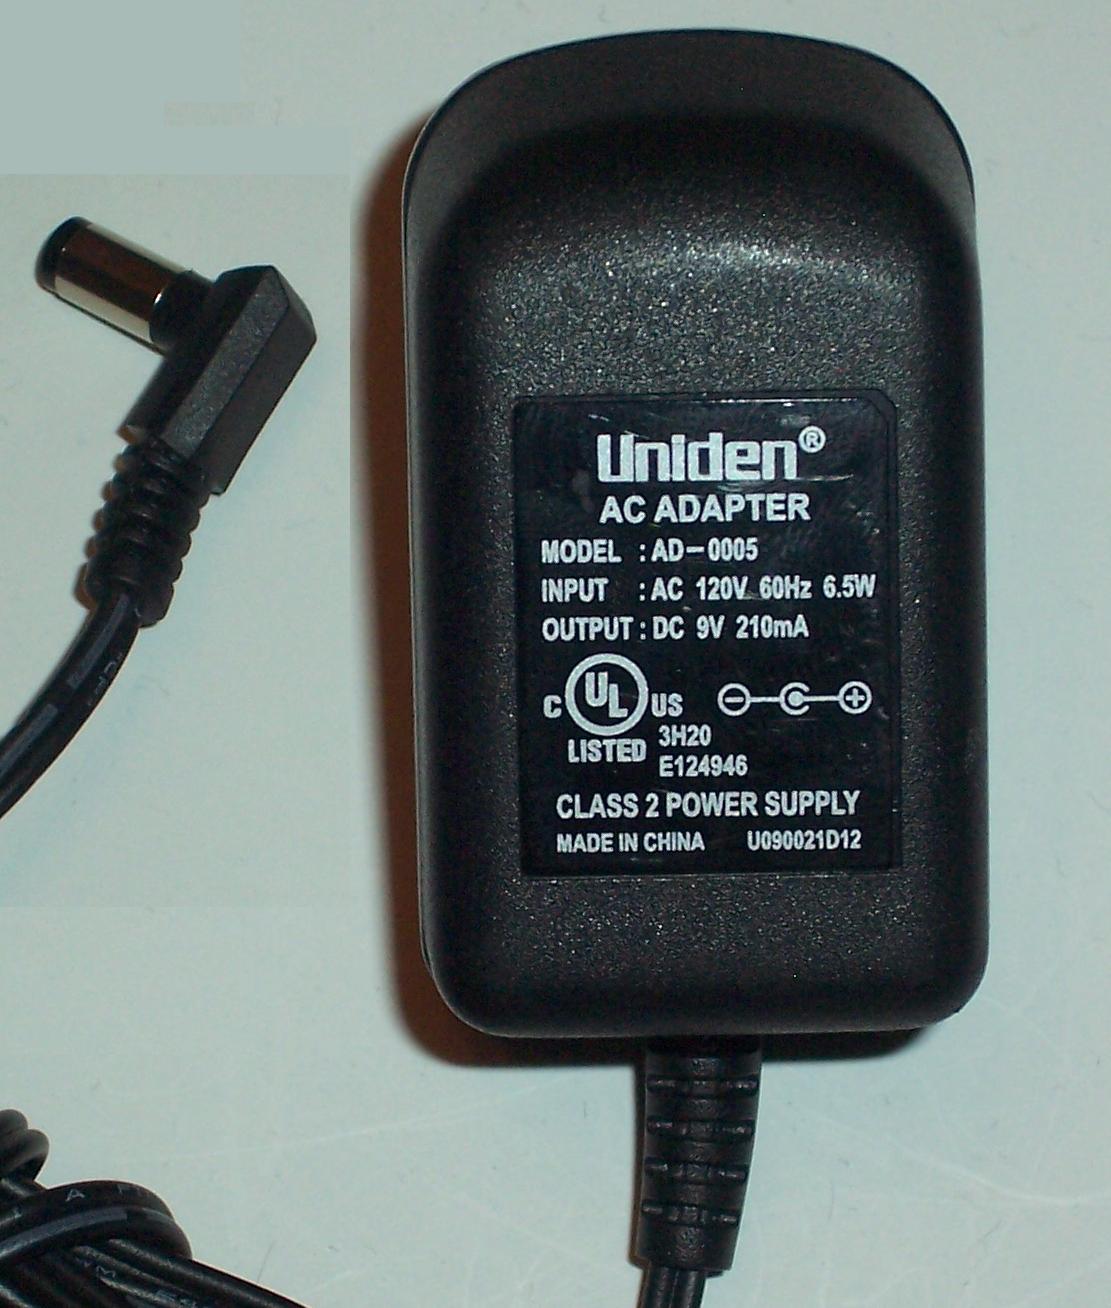 UNIDEN AD-0005 AC ADAPTER 9VDC 210mA POWER SUPPLY CLASS 2